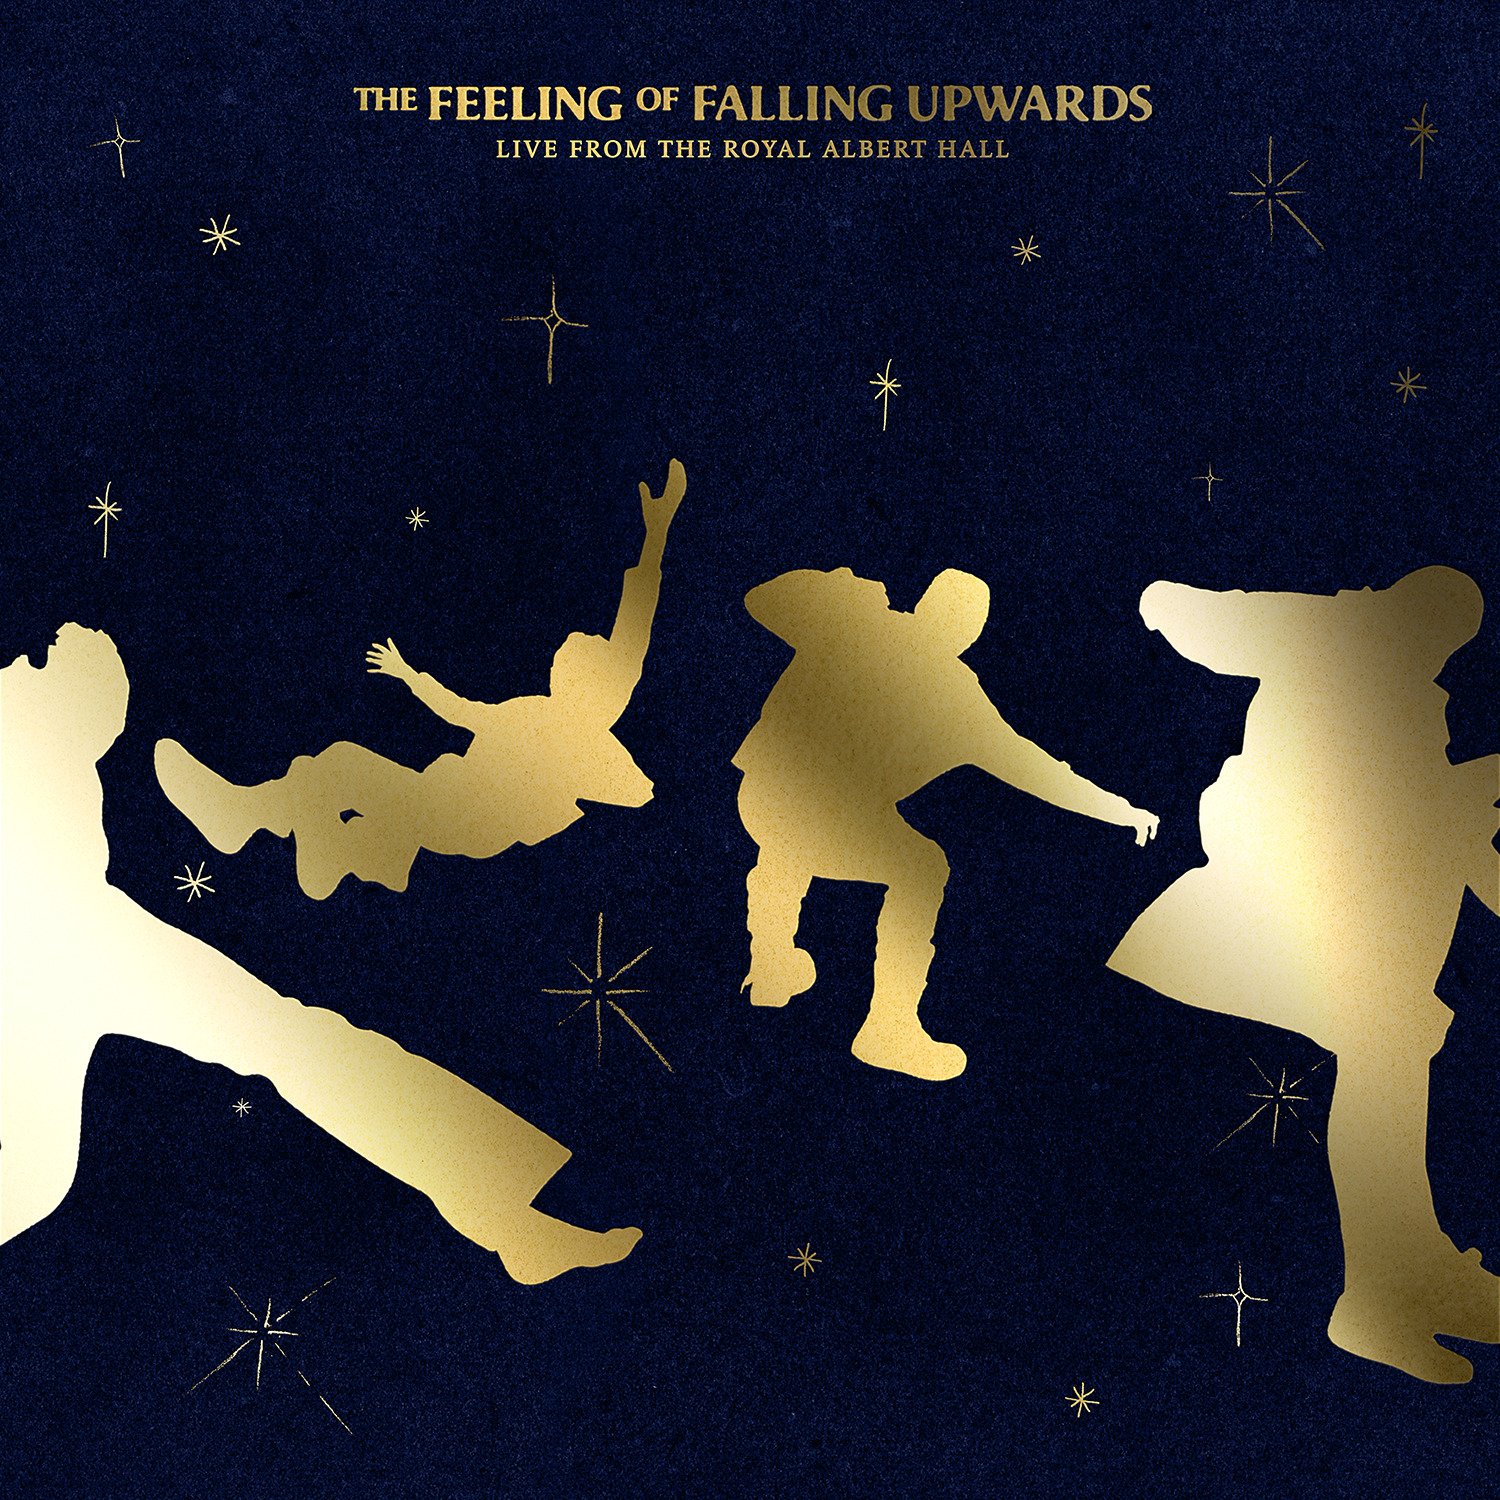 CD Shop - 5 SECONDS OF SUMMER THE FEELING OF FALLING UPWARDS (LIVE FROM THE ROYAL ALBERT HALL) [DELUXE] (MEDIABOOK)